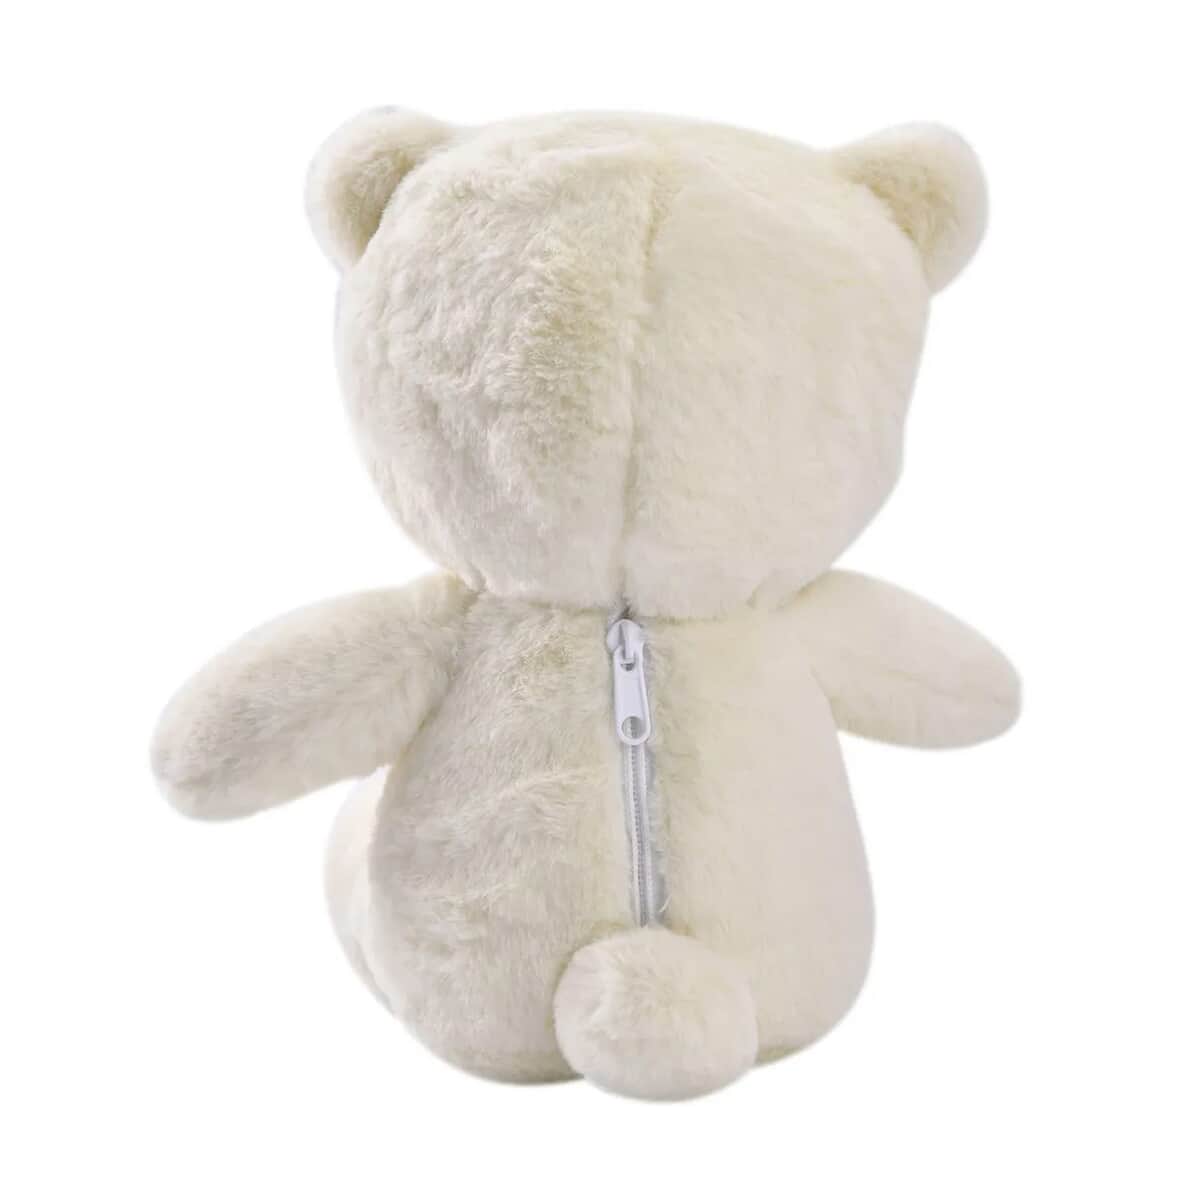 Off White Teddy Bear Toy with Zipper Bag (10 In) image number 4